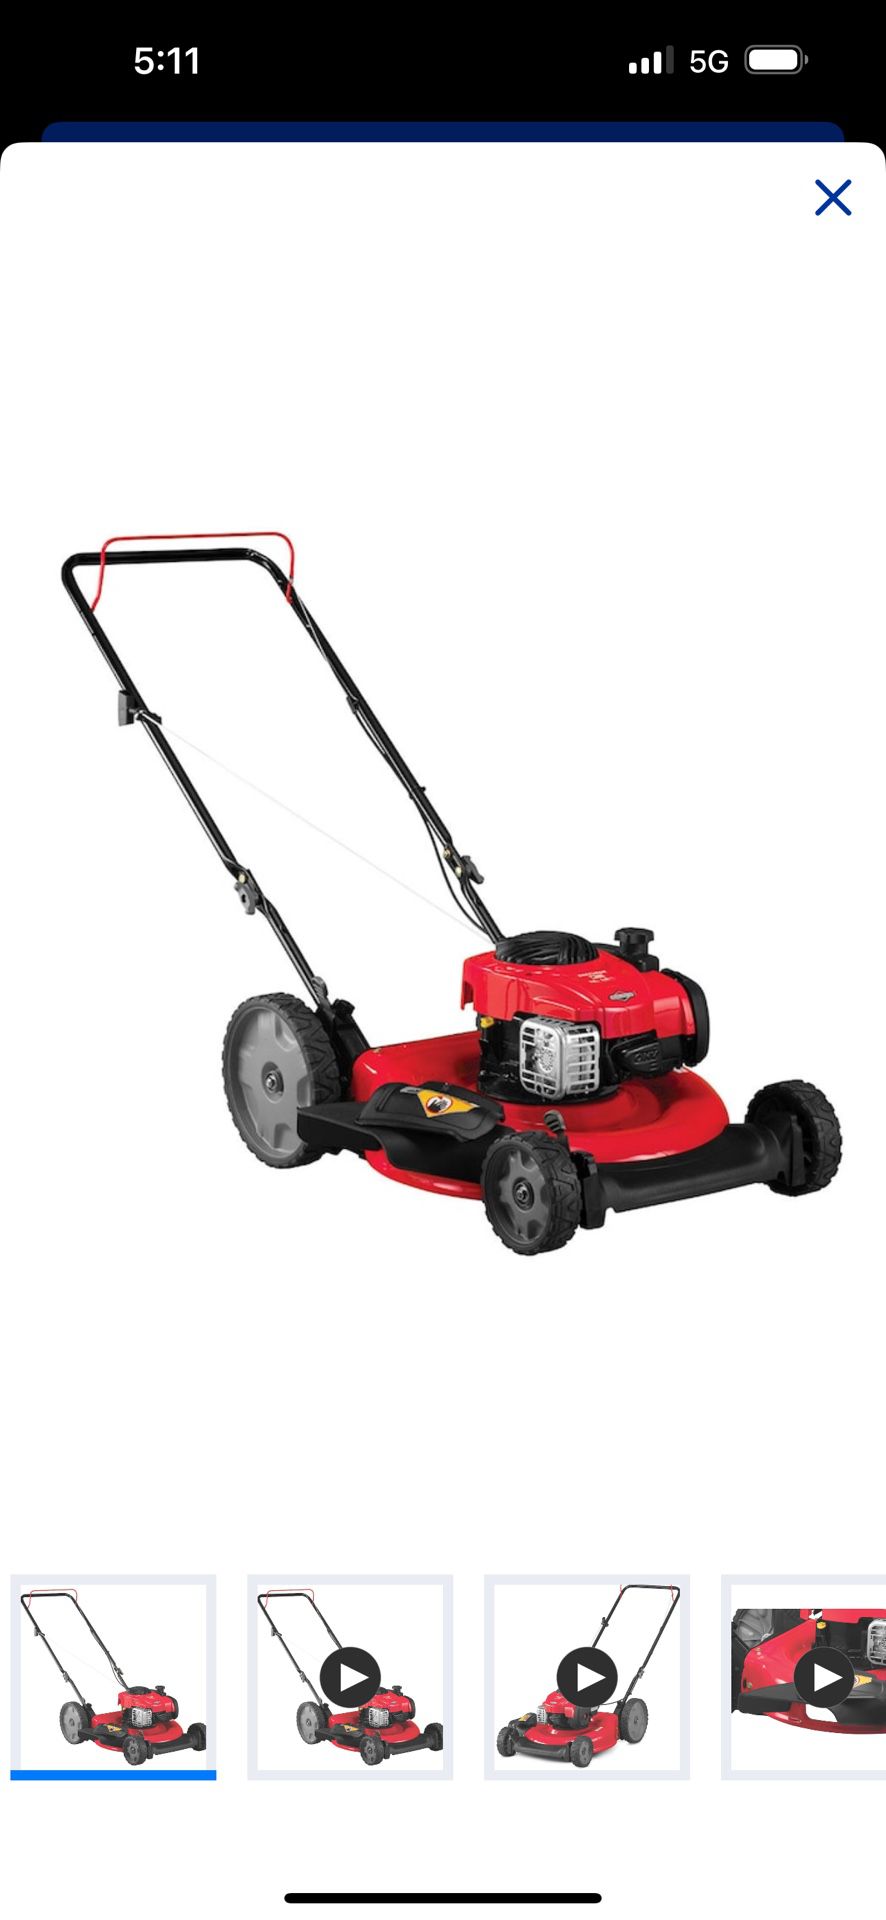 M100 140cc 21-in Gas Push Lawn Mower With Briggs And Stratton Engine 